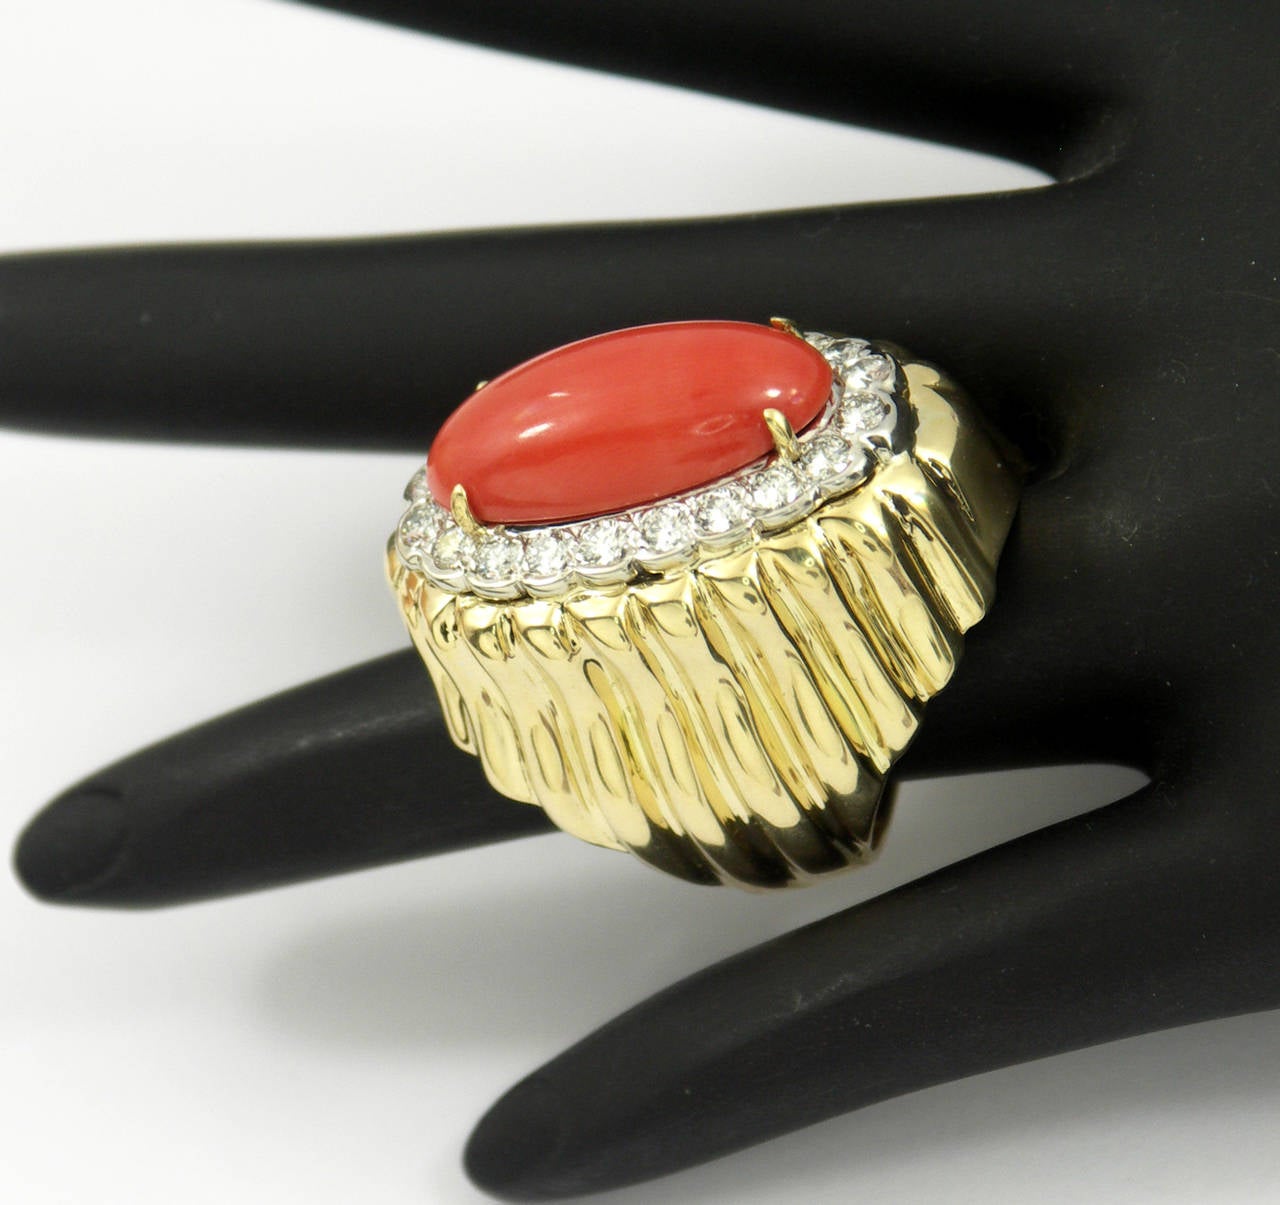 An 18K yellow gold ring set with one oval cabochon coral measuring 22mm X 12mm. Surrounding the coral are 20 round brilliant cut diamonds set in a white gold plate weighing 1.5ct total approximate weight. Ring size 6 1/2